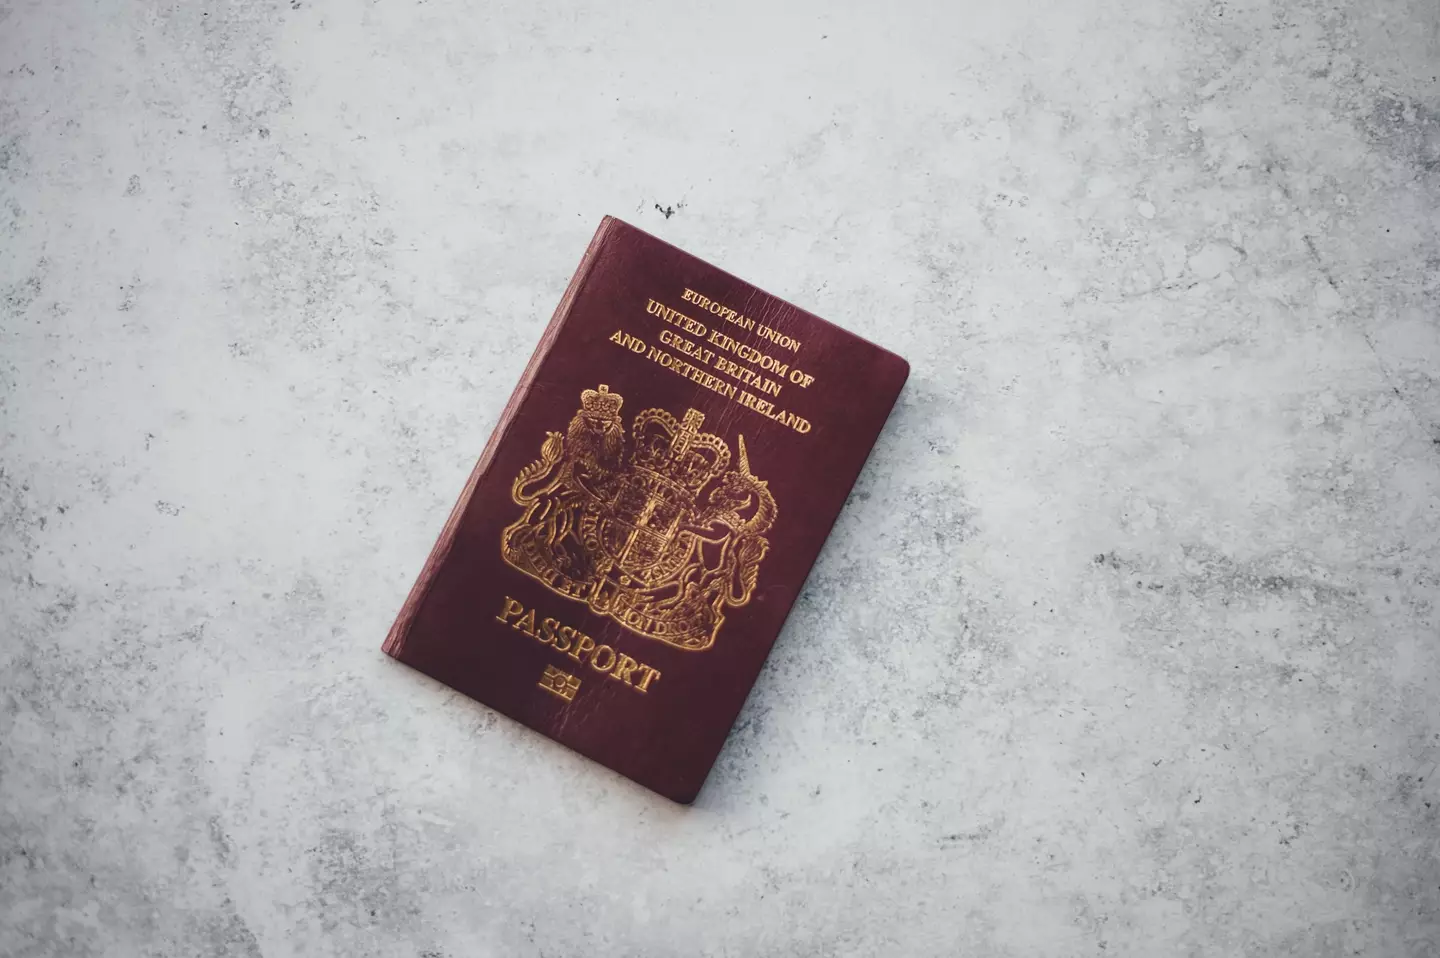 A warning has been issued to Brits still carrying a red passport.